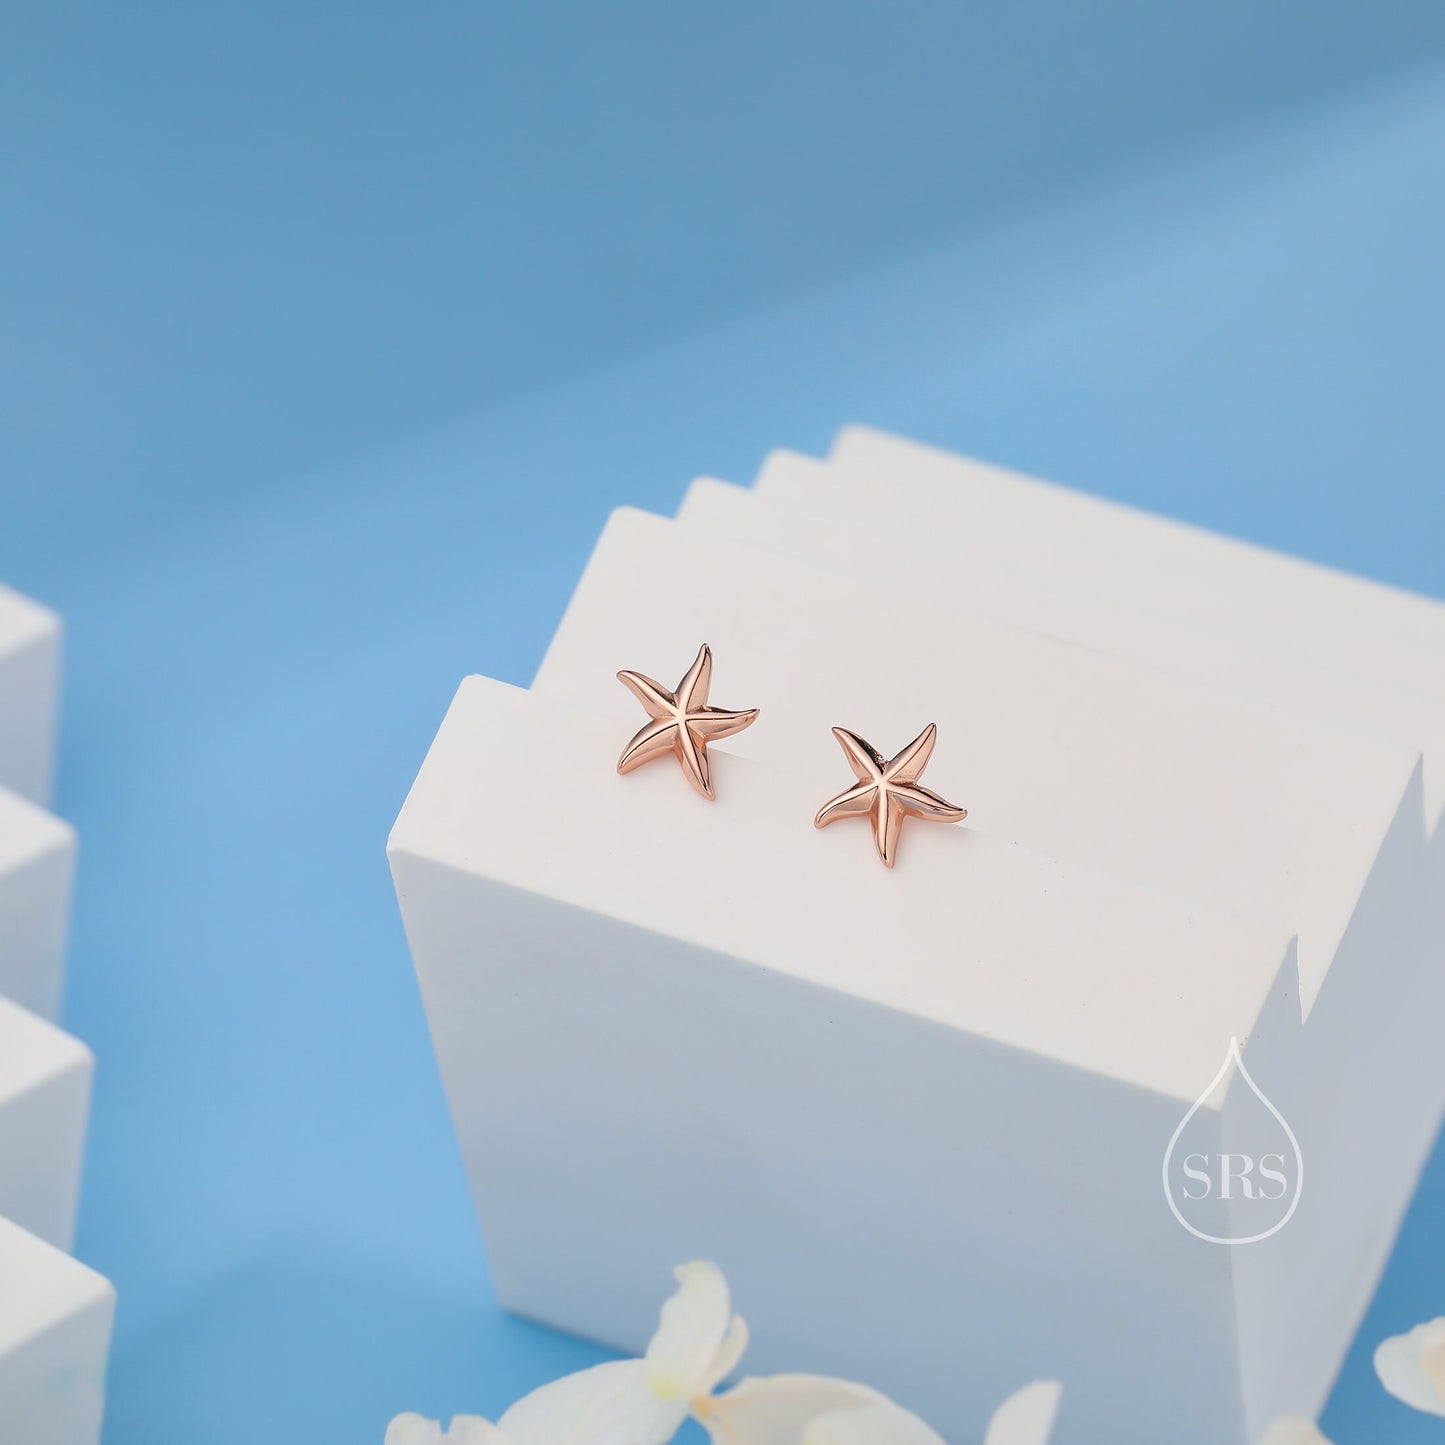 Tiny Starfish Stud Earrings in Sterling Silver, Silver, Gold or Rose Gold, Small Starfish Earrings, Star Fish Earrings, Sea Star Earrings